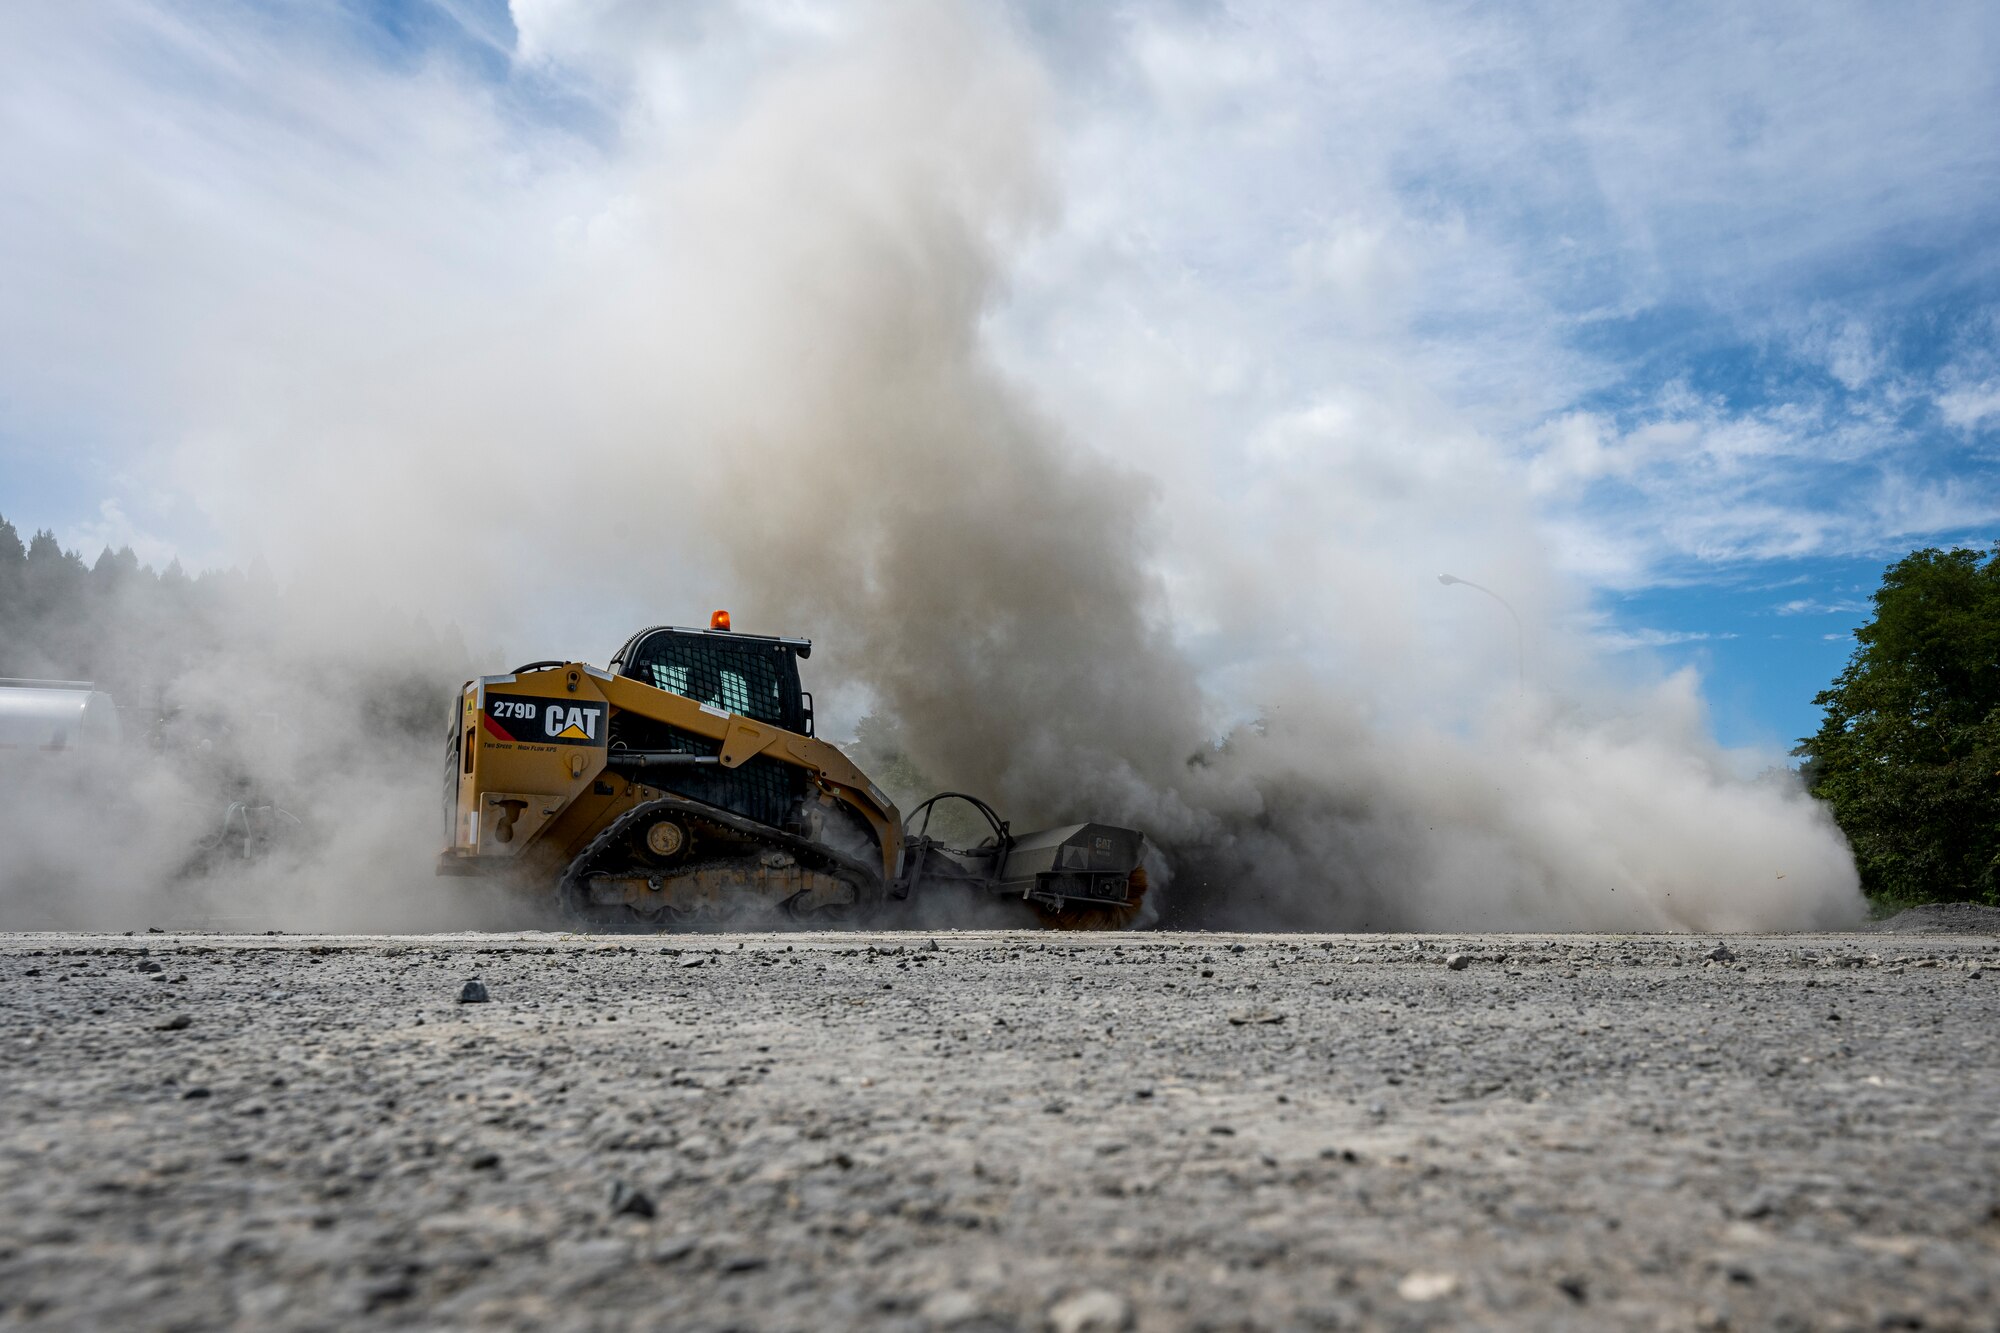 A piece of heavy machinery kicks up a cloud of dust.